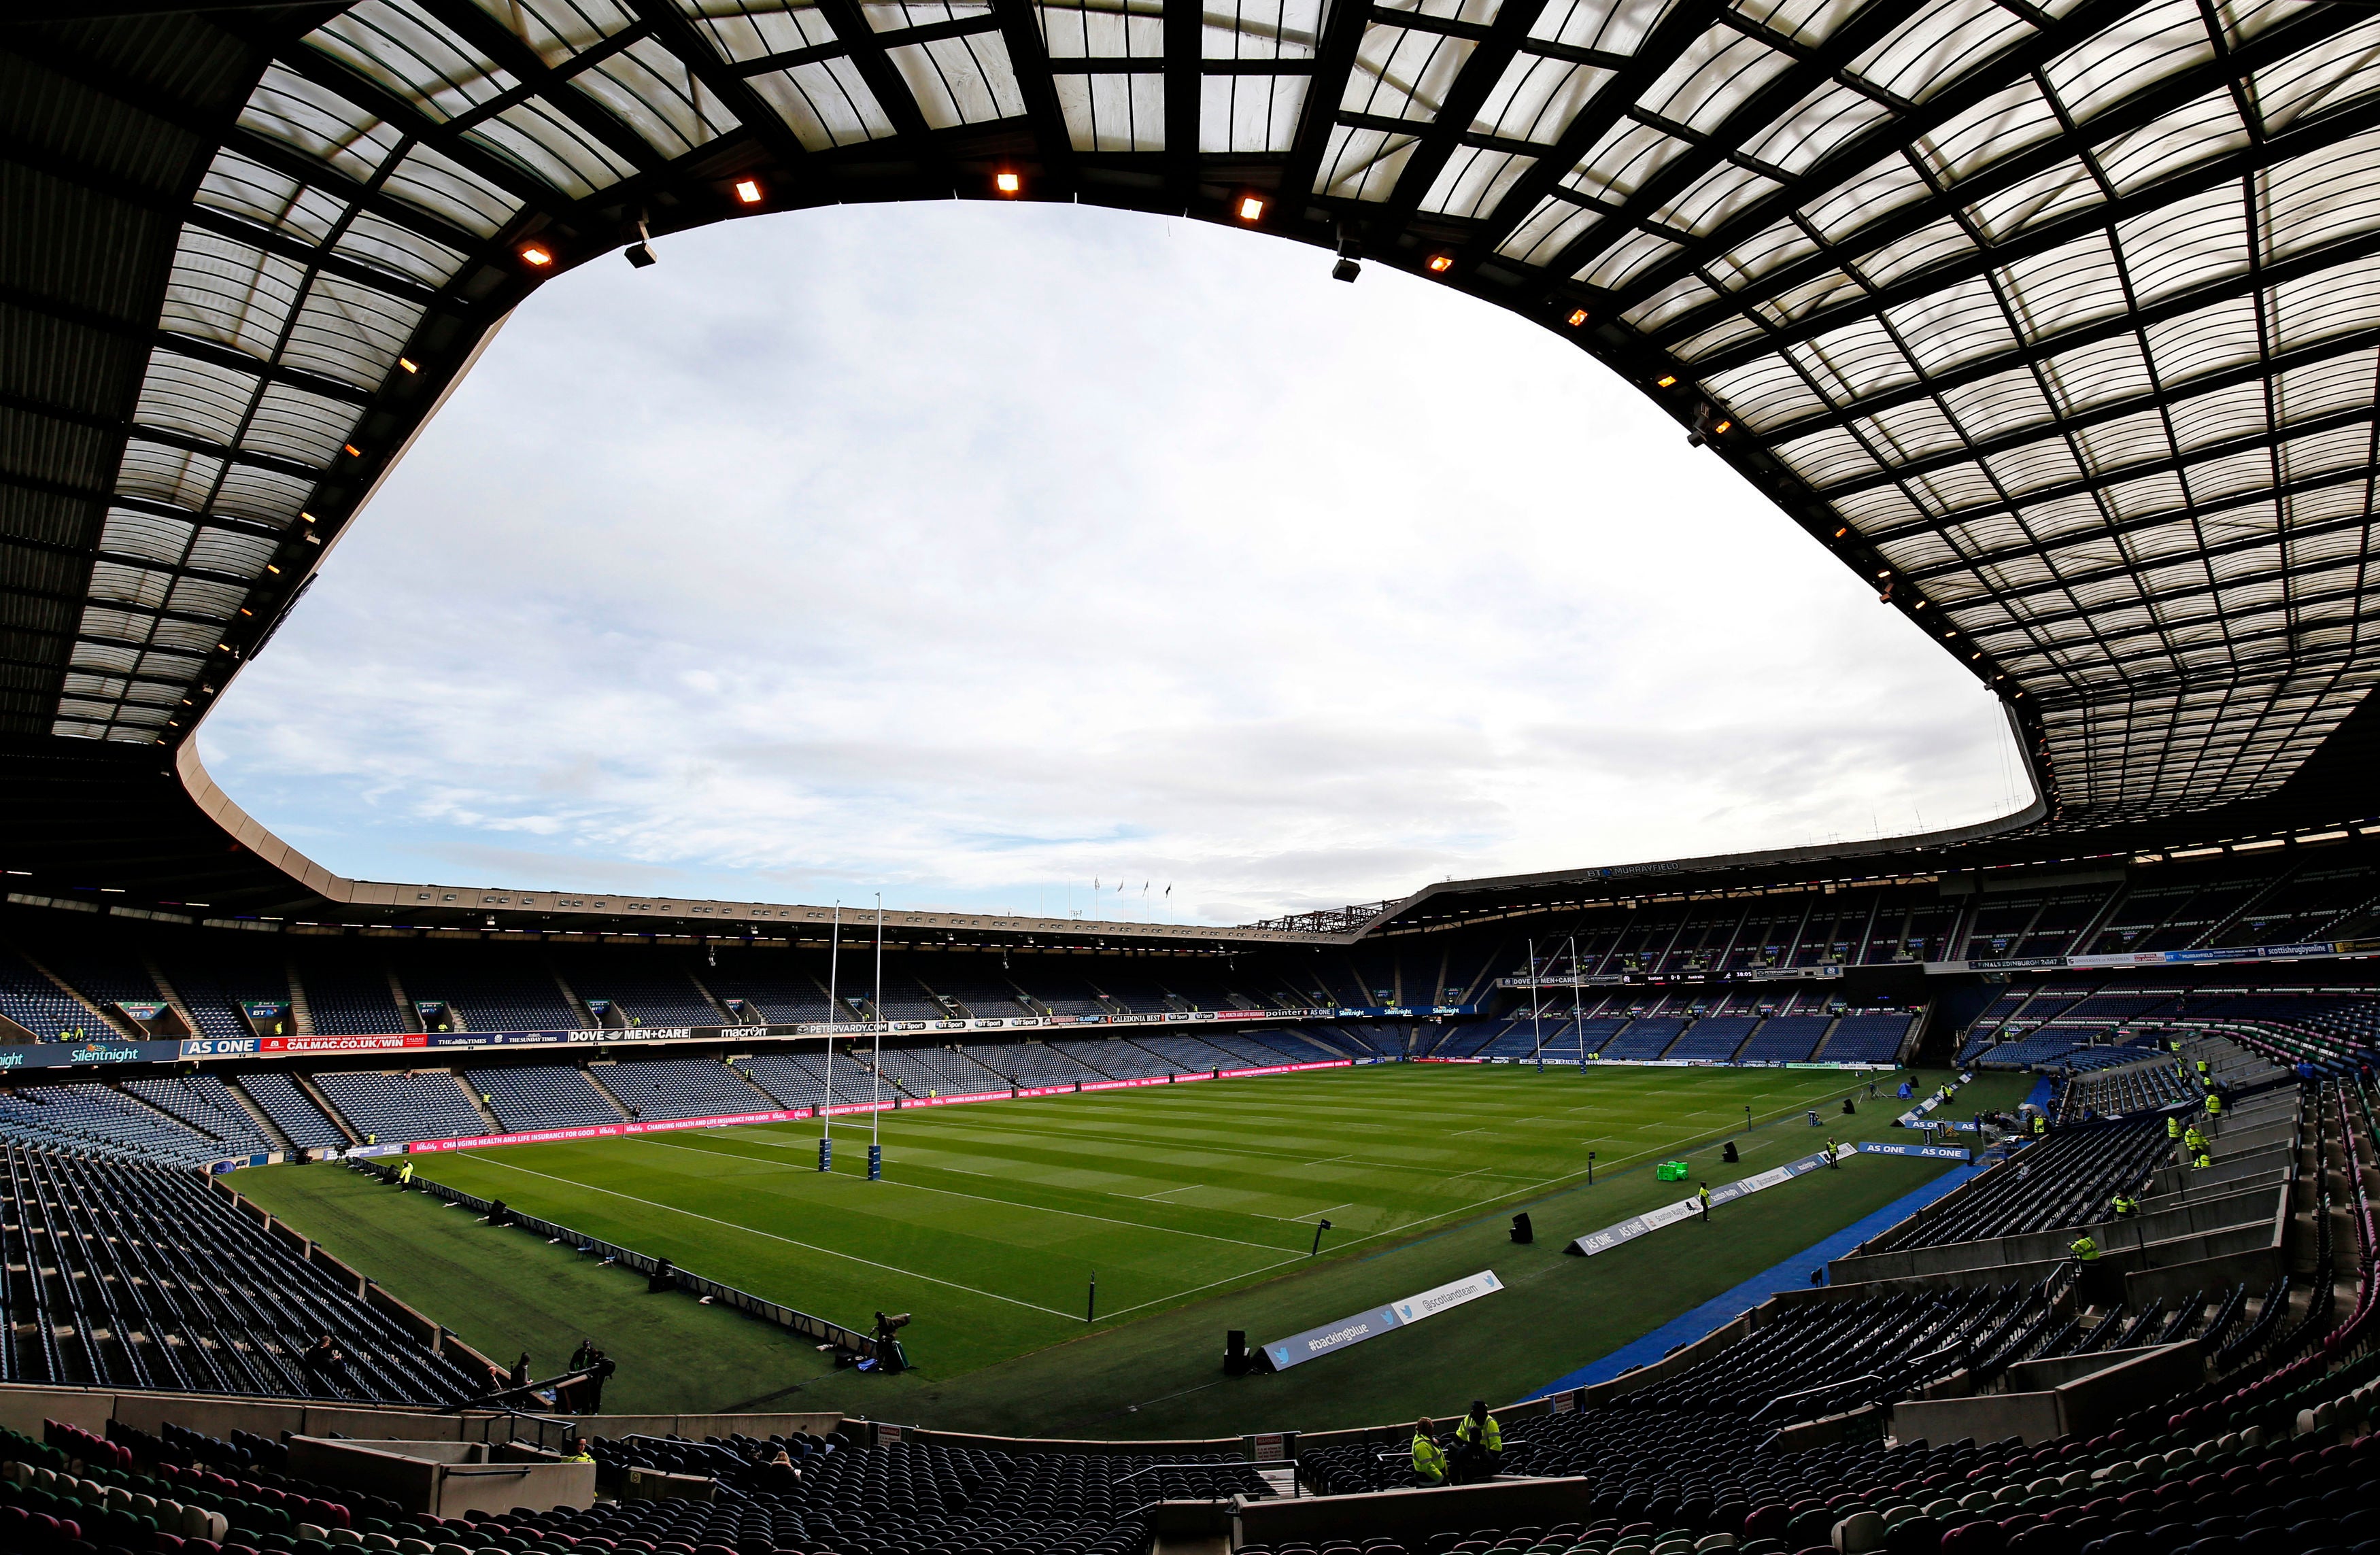 The Lions will face Japan at Murrayfield on the same day as the Premiership final